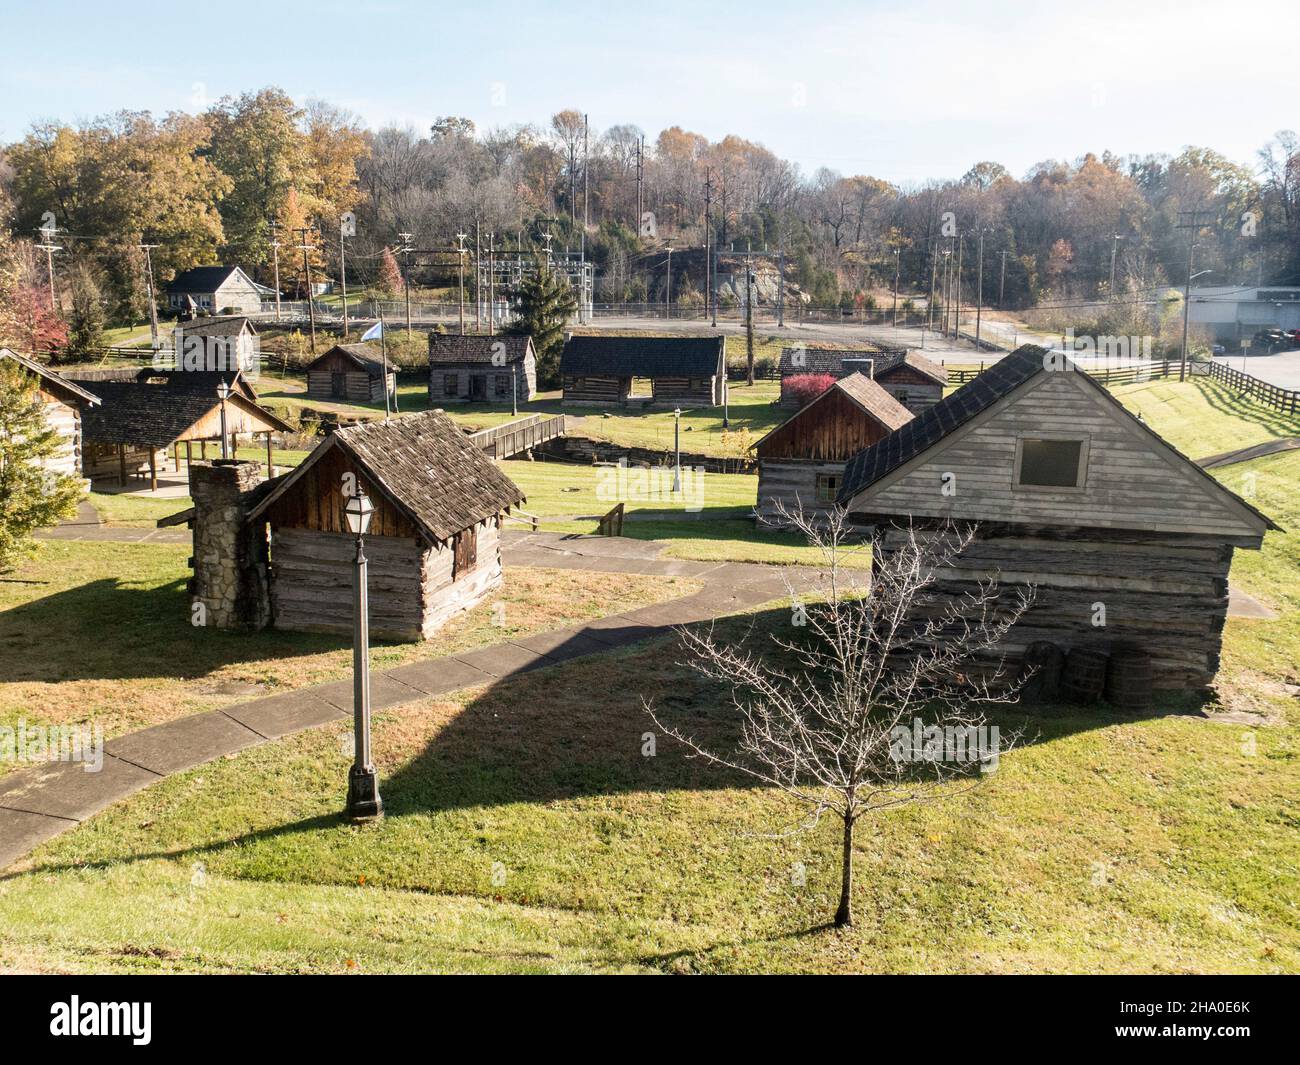 Old Bardstown Village, a collection log structures that form a Colonial period settlement along Bardstown’s Museum Row. Bardstown Kentucky Stock Photo